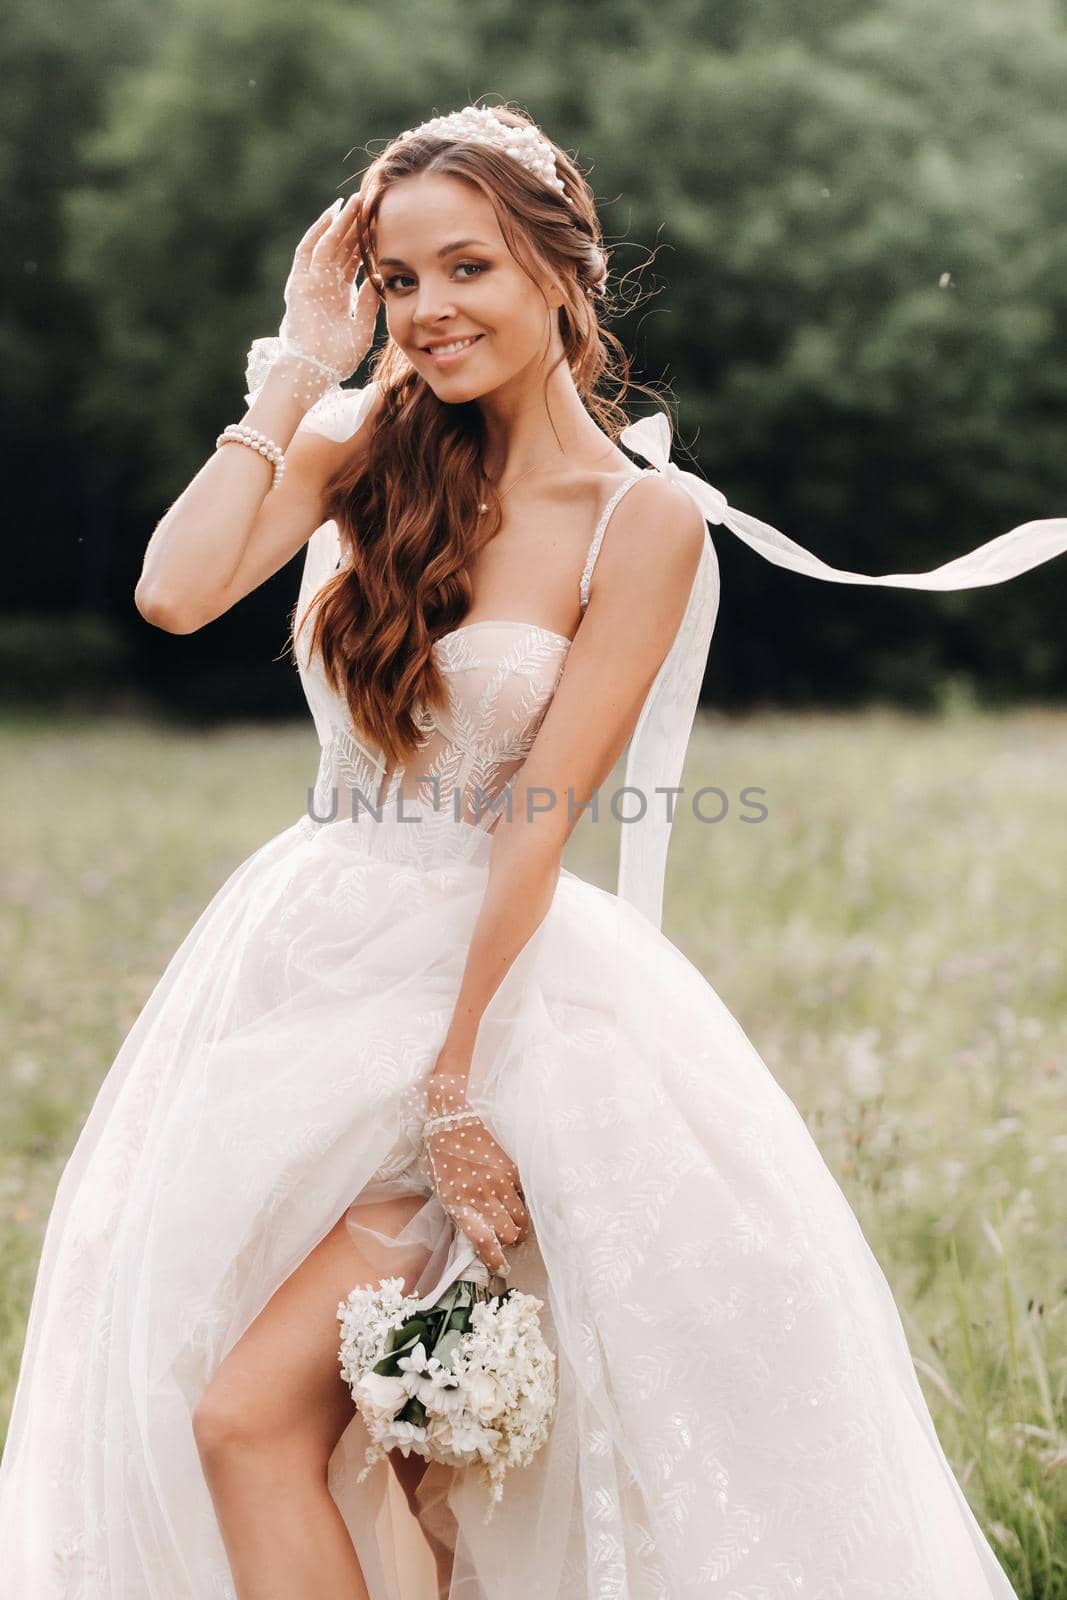 On the wedding day, an Elegant bride in a white long dress and gloves with a bouquet in her hands stands in a clearing enjoying nature. Belarus. by Lobachad